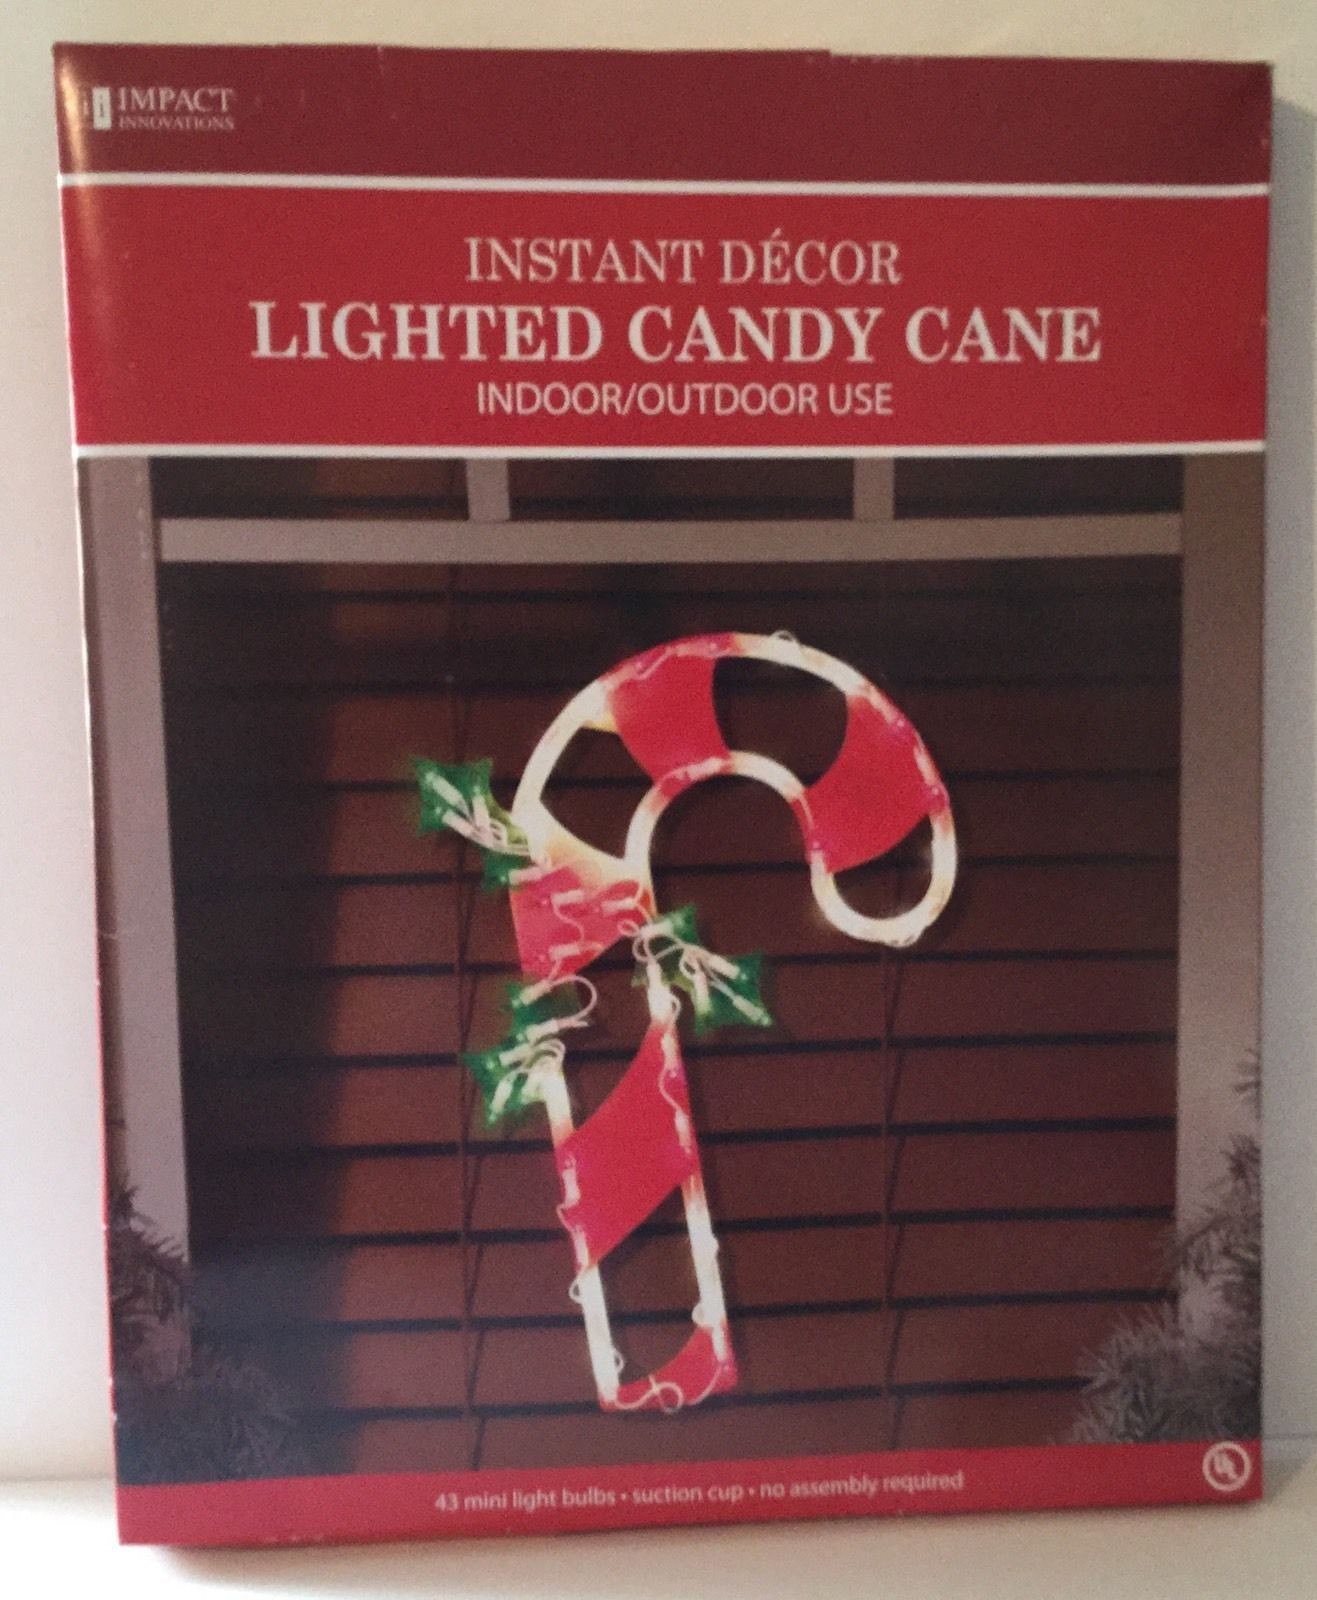 Lighted Christmas Window Decorations Indoor
 CANDY CANE SILHOUETTE Lighted Holiday Window Decoration